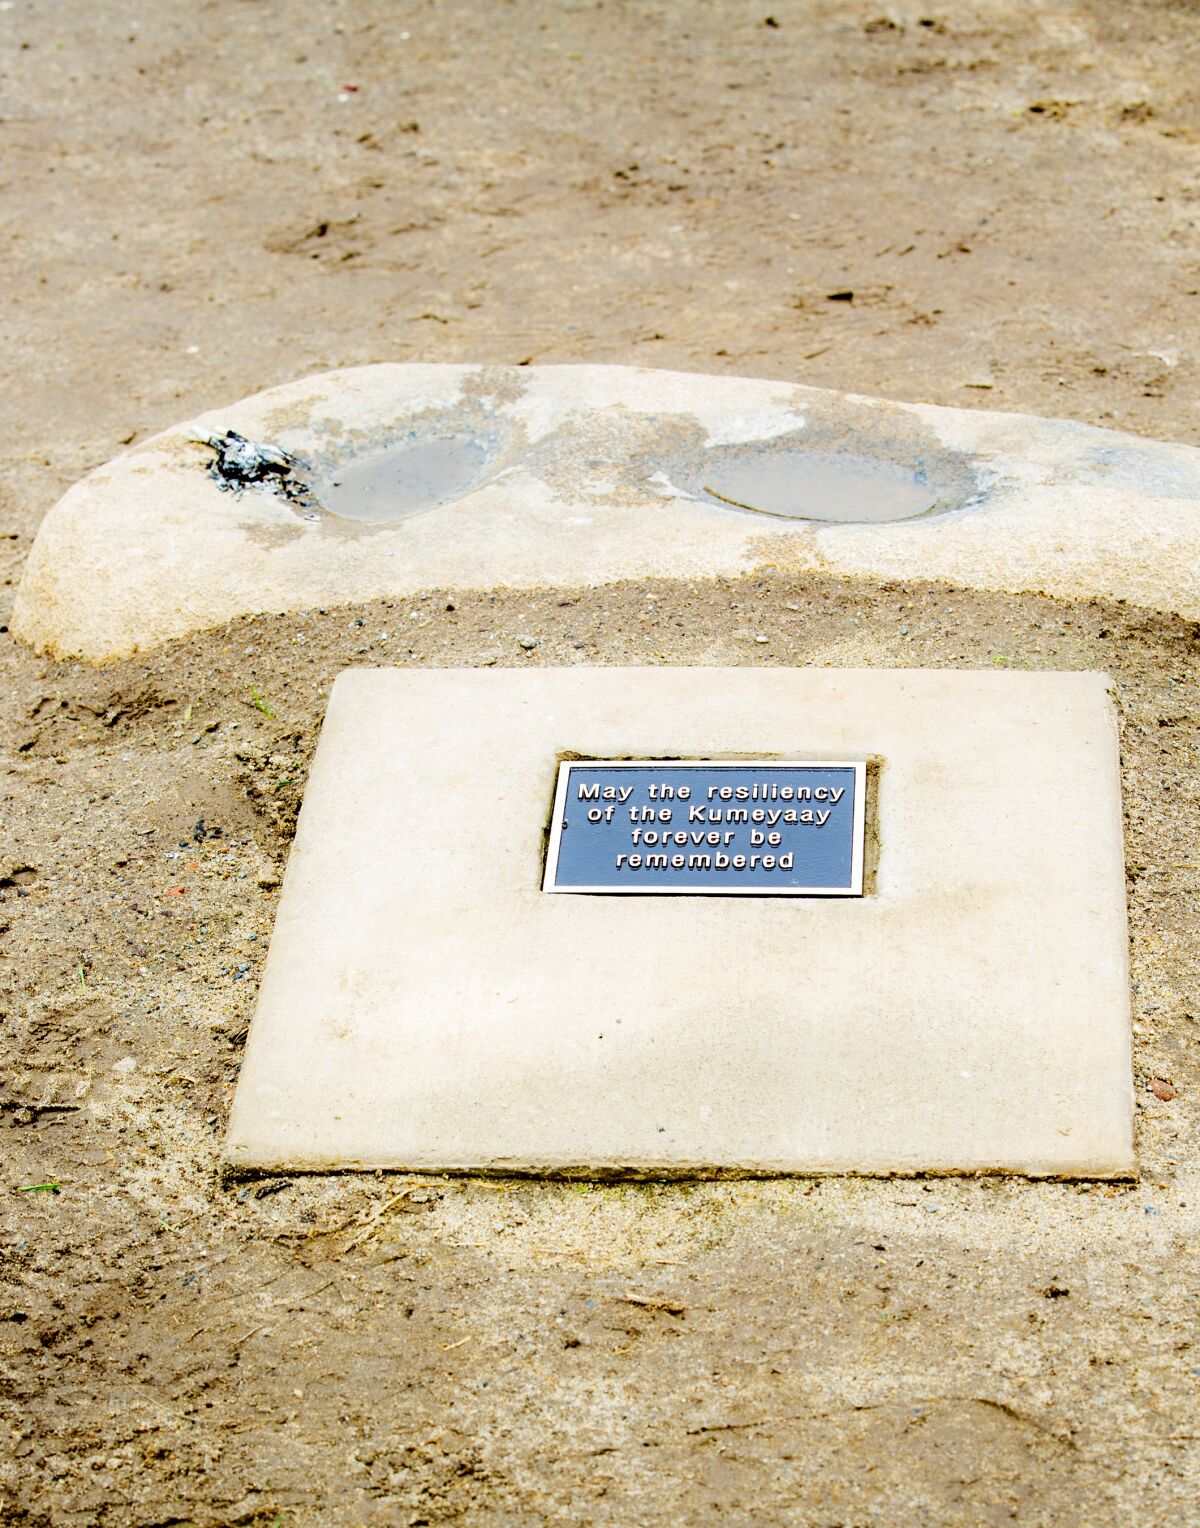 A plaque placed in front of the bedrock mortar in Cuvier Park.